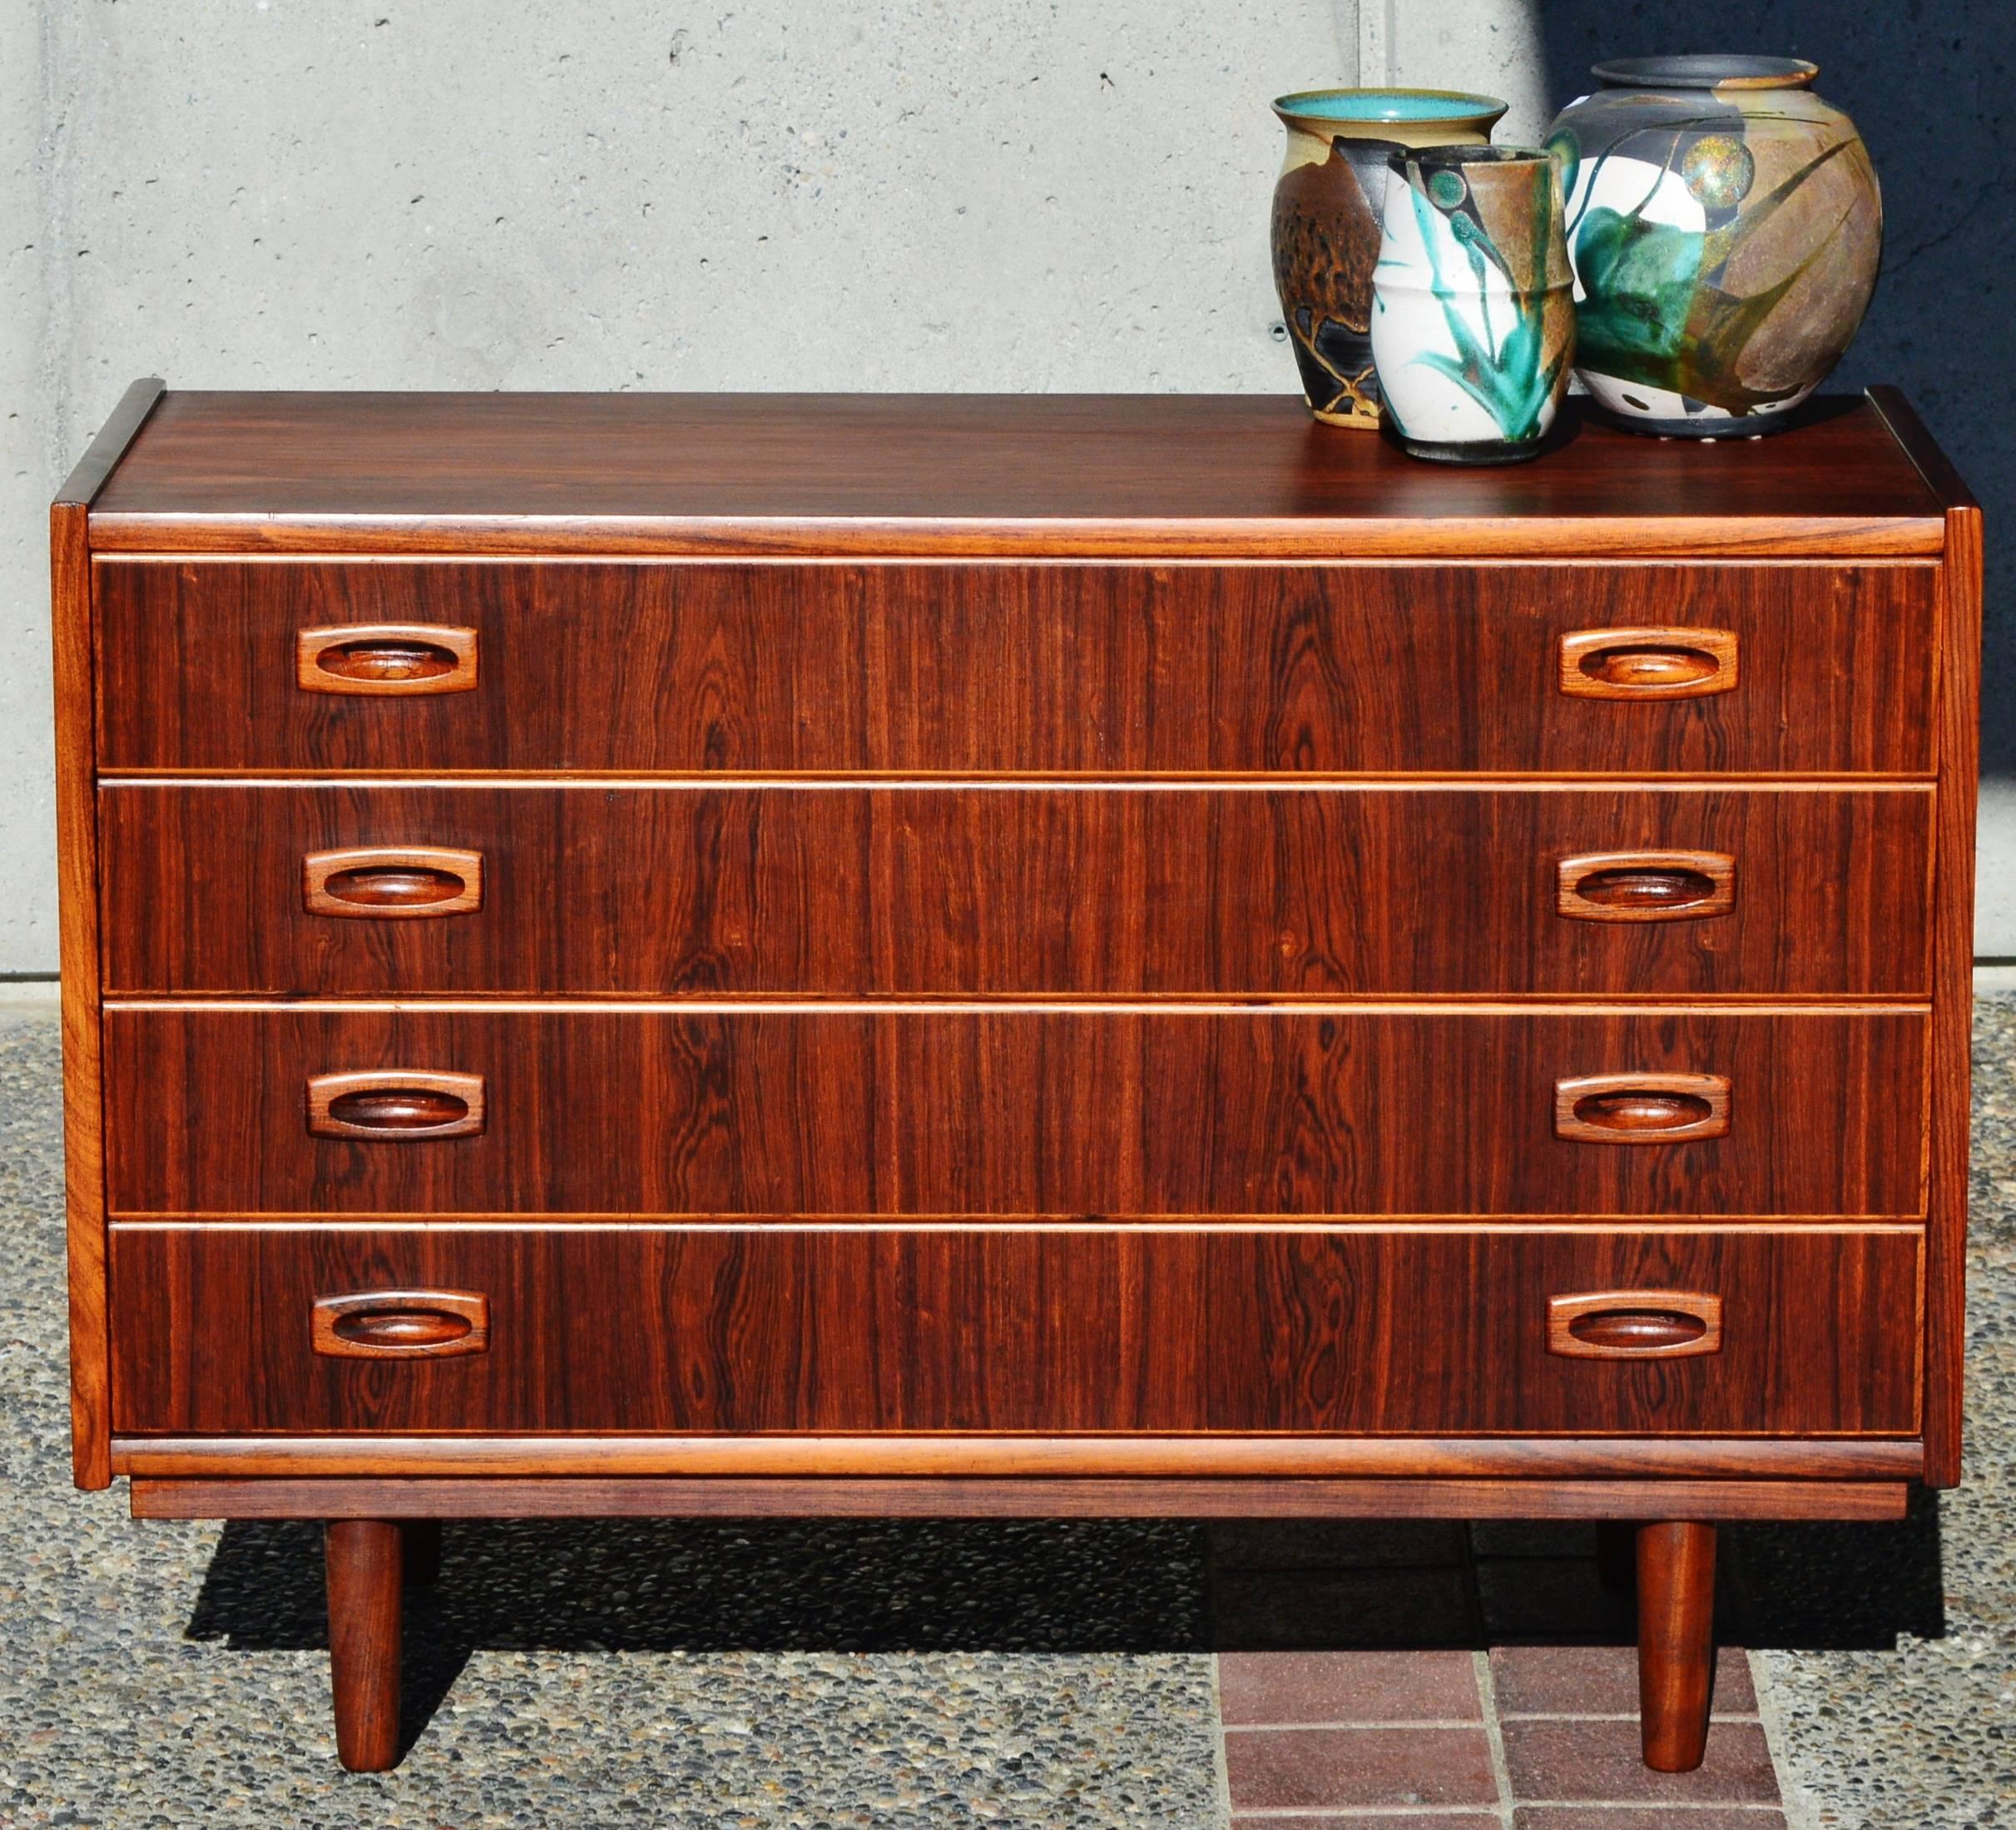 This impeccable Danish modern rosewood four-drawer chest or dresser is a top quality design by Dammand & Rasmussen, acclaimed Danish craftsmen. Featuring all hardwood construction, with birch drawer frame construction and dove tail joins. Note the